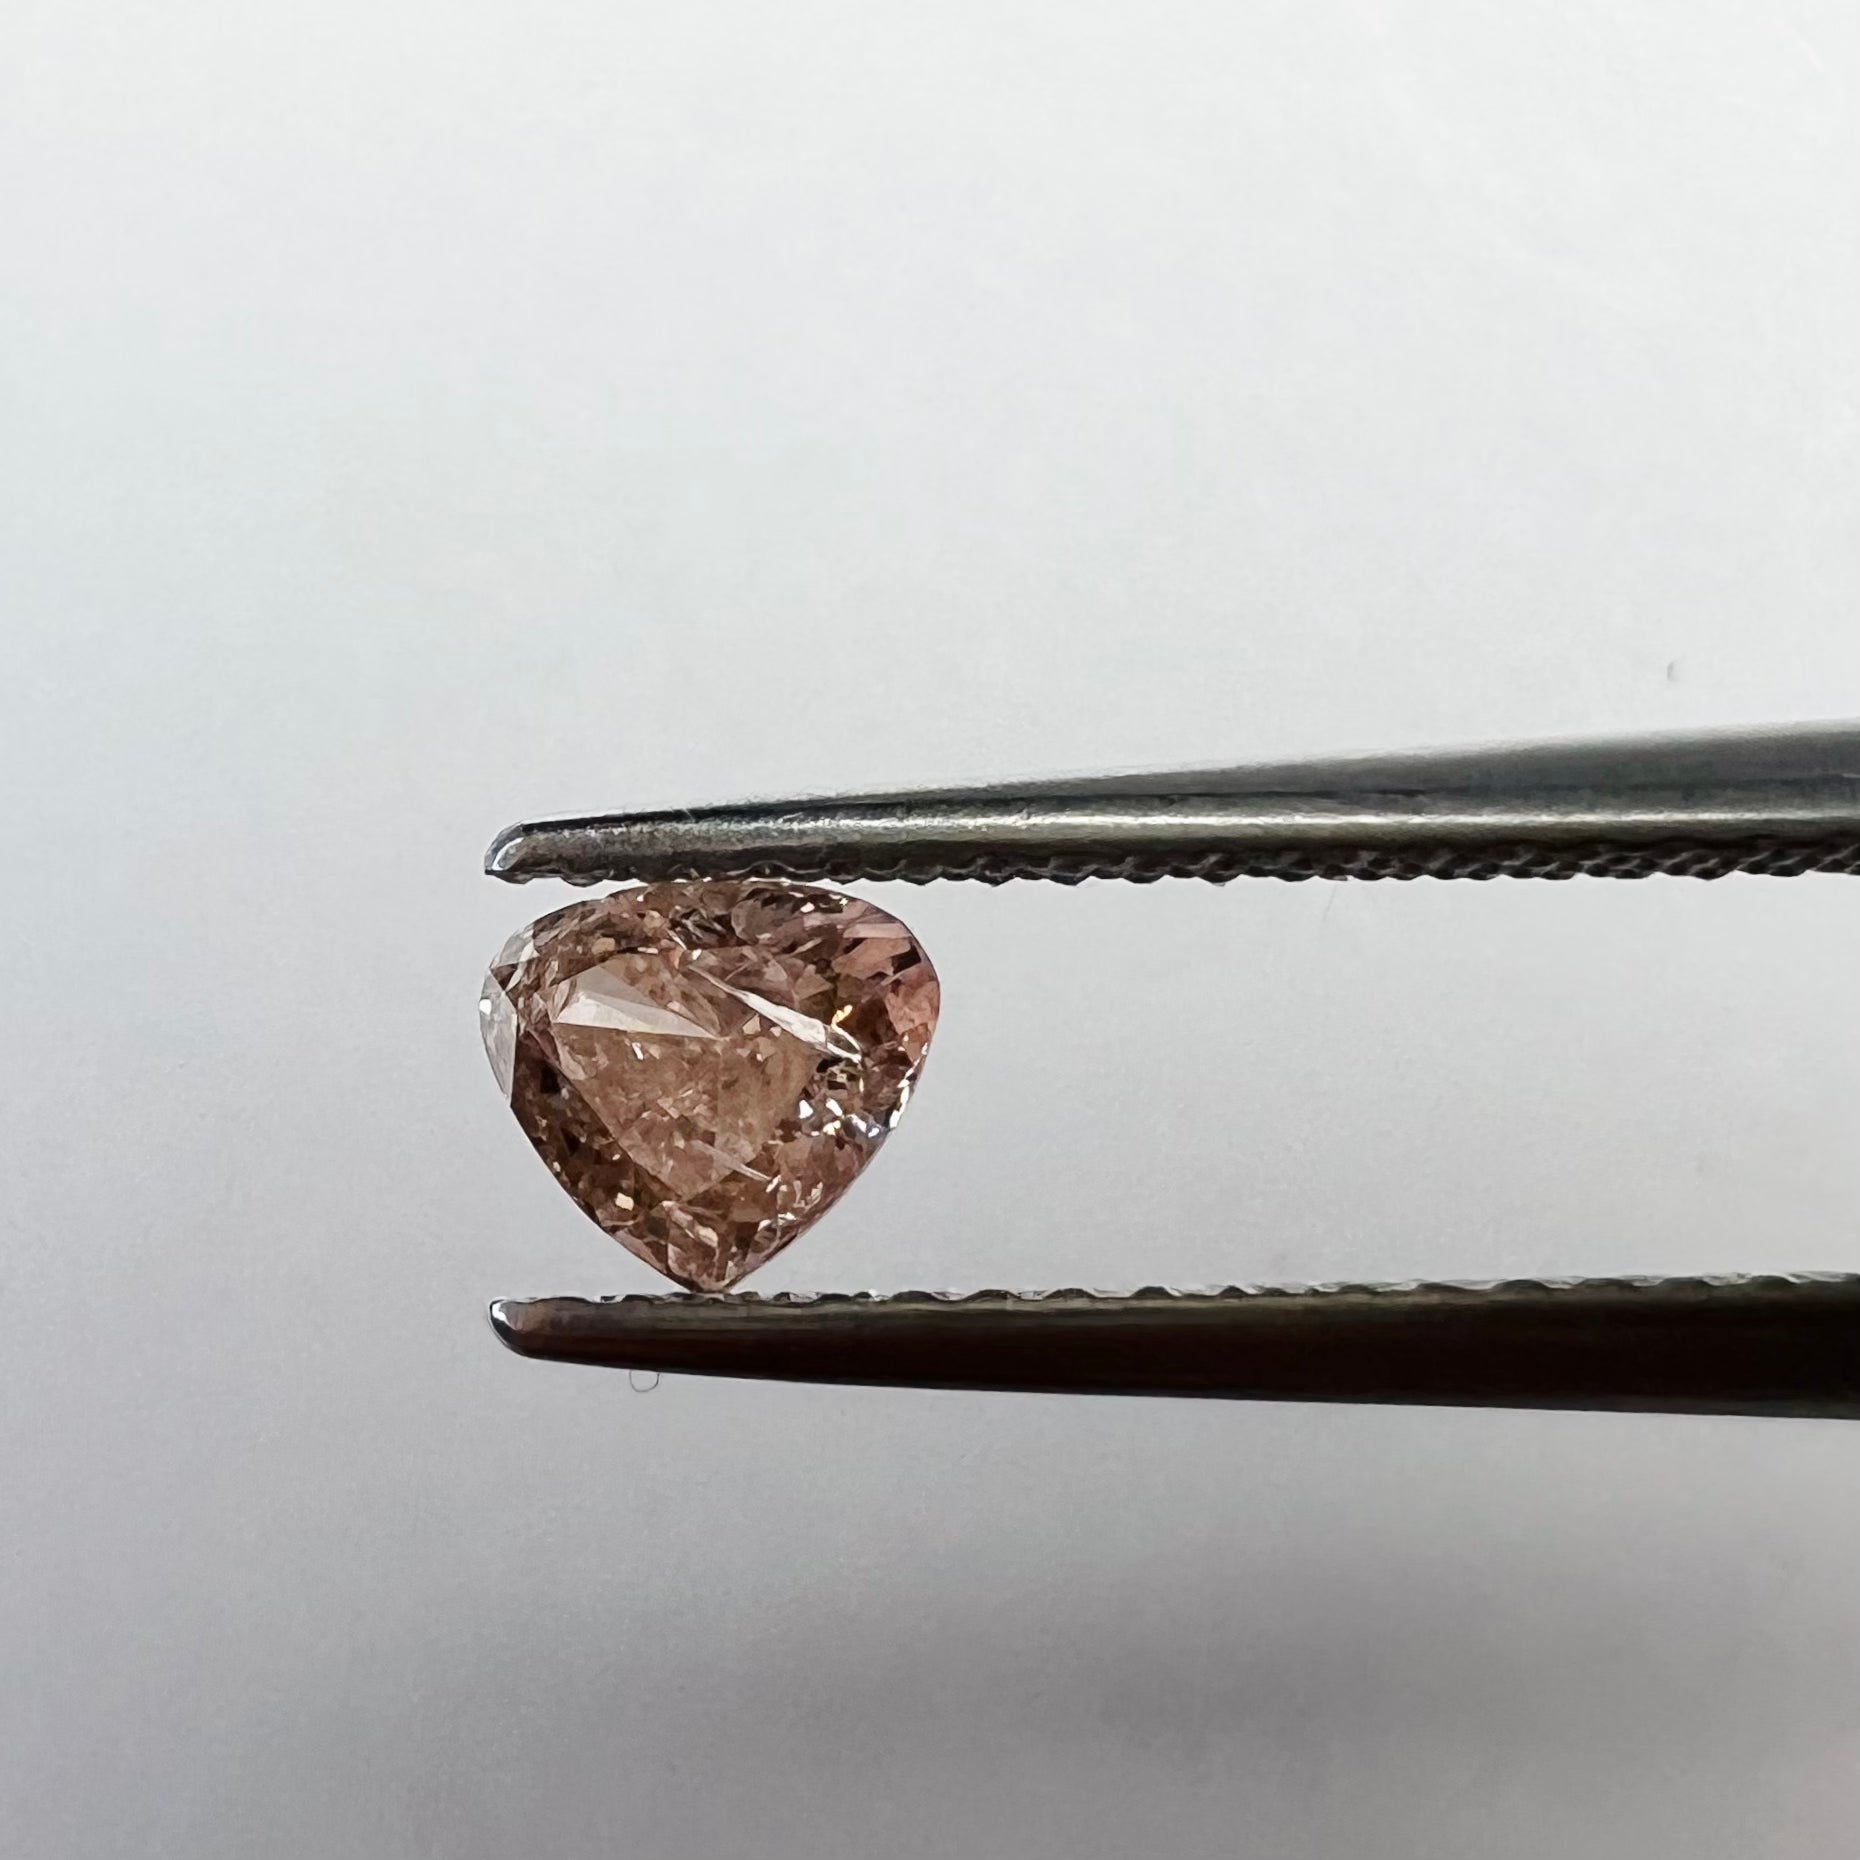 .48CT Modified Heart Diamond Fancy Pink Brown I2 4.73x5.30x2.84mm Natural Earth